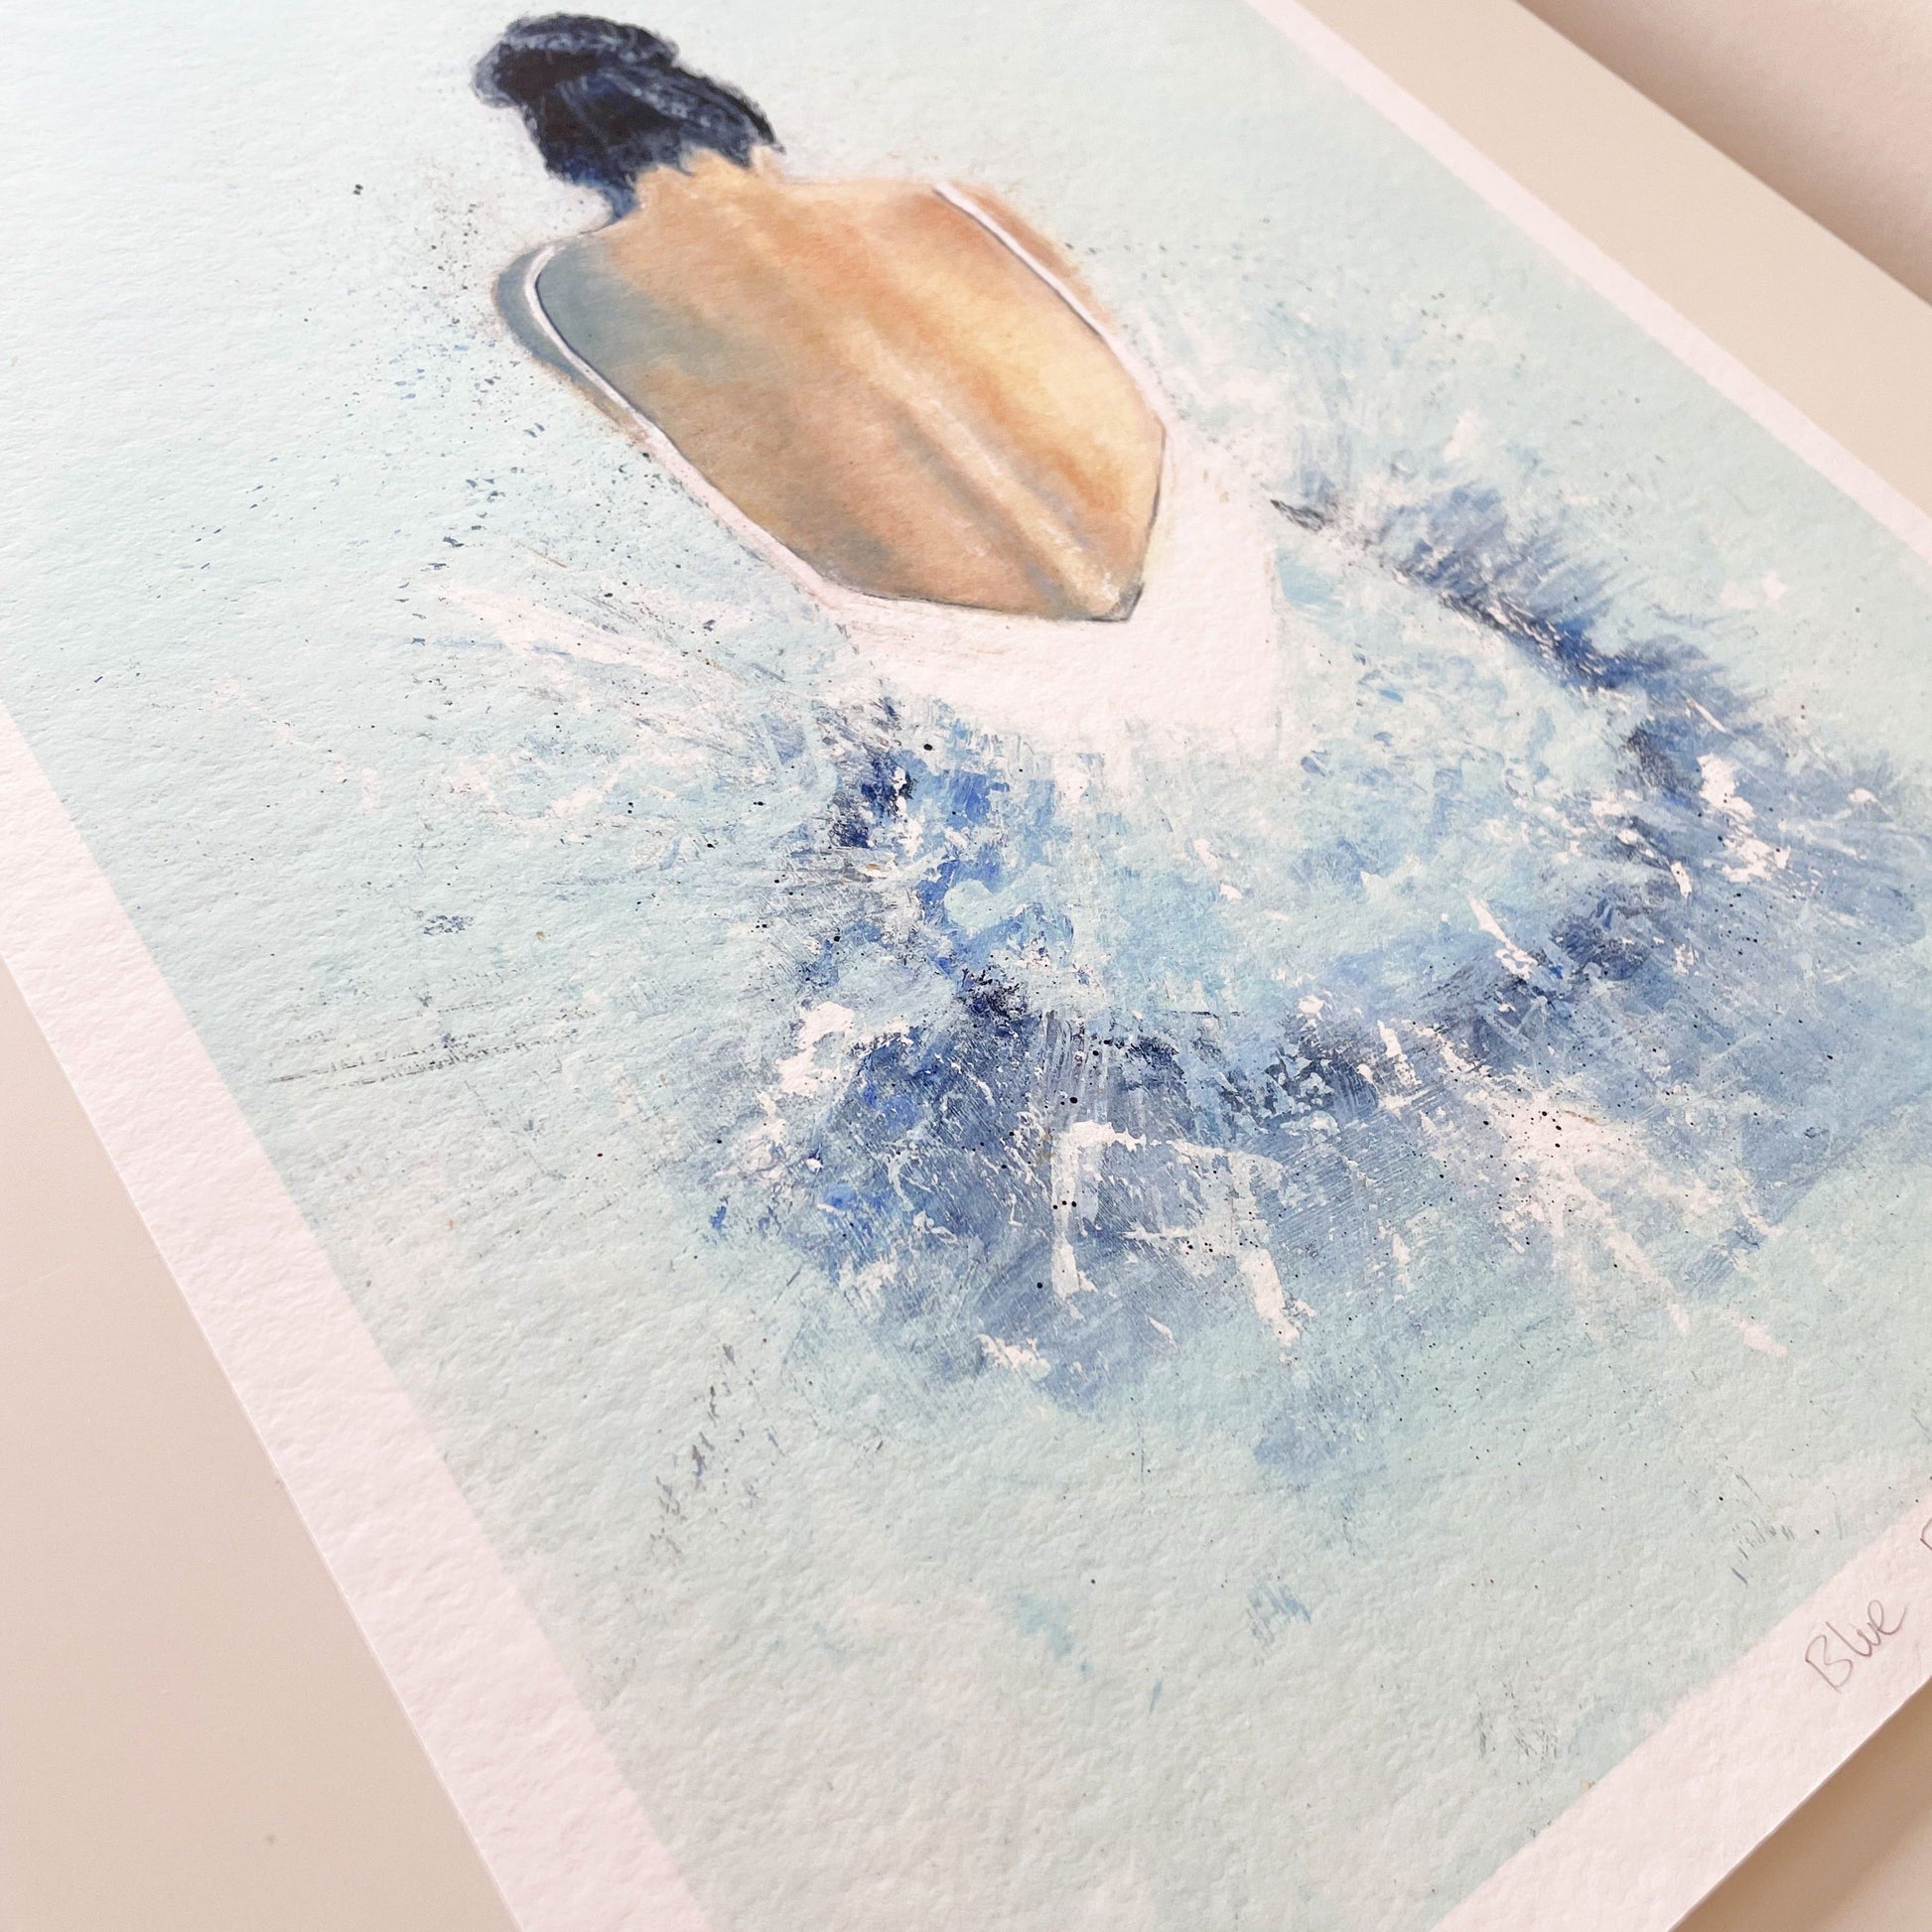 Print of an acrylic painting of a ballerina painted in blue. The photo os taken from an angle